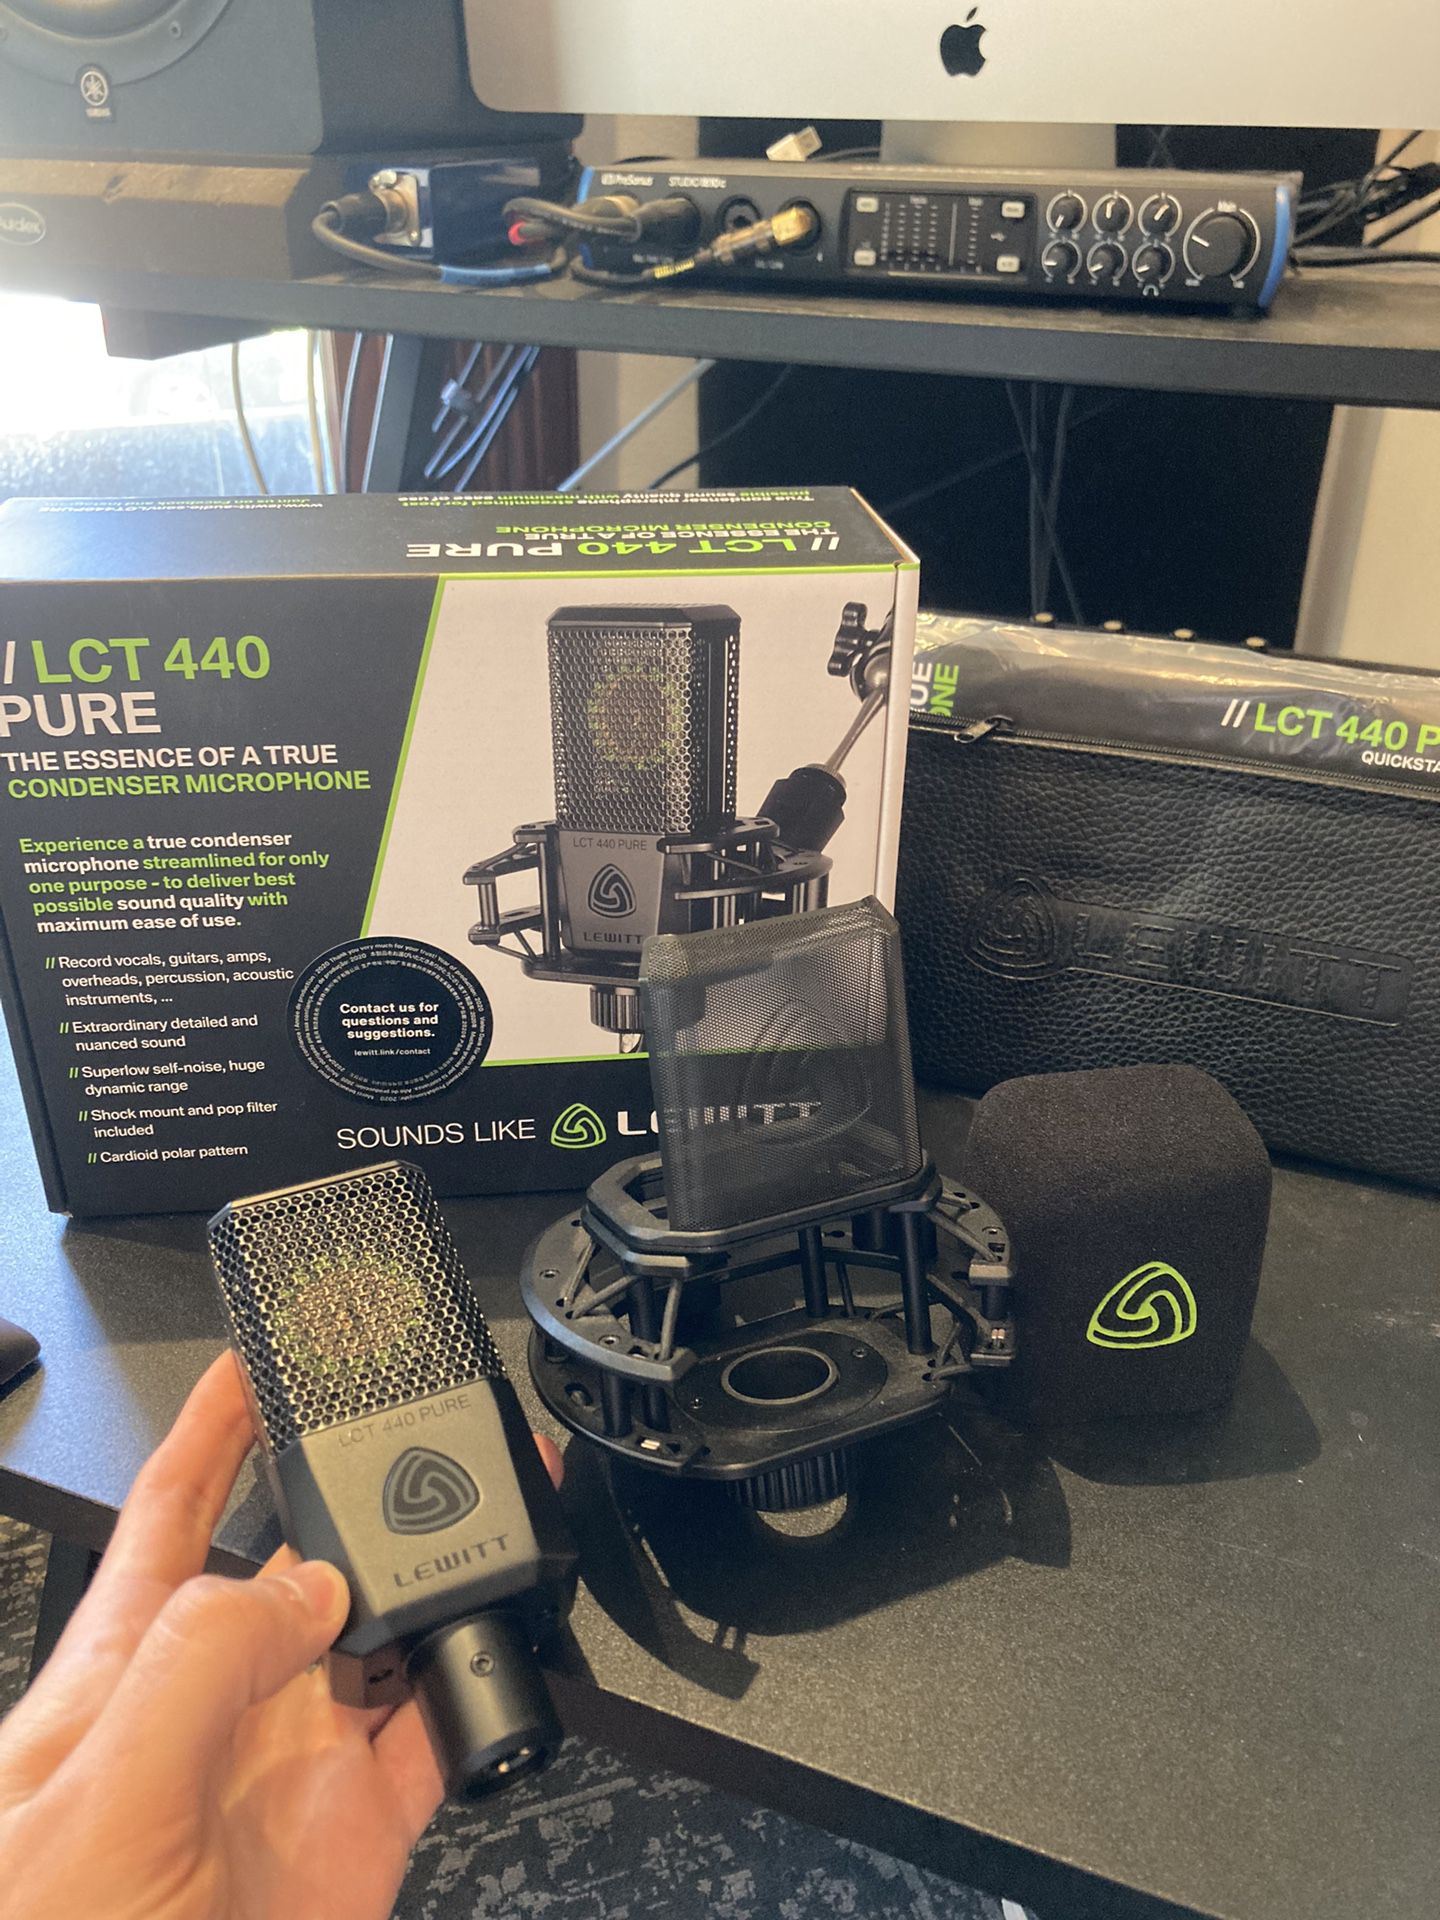 Lewitt LCT 440 Pure Condenser Microphone for Sale in Alhambra, CA